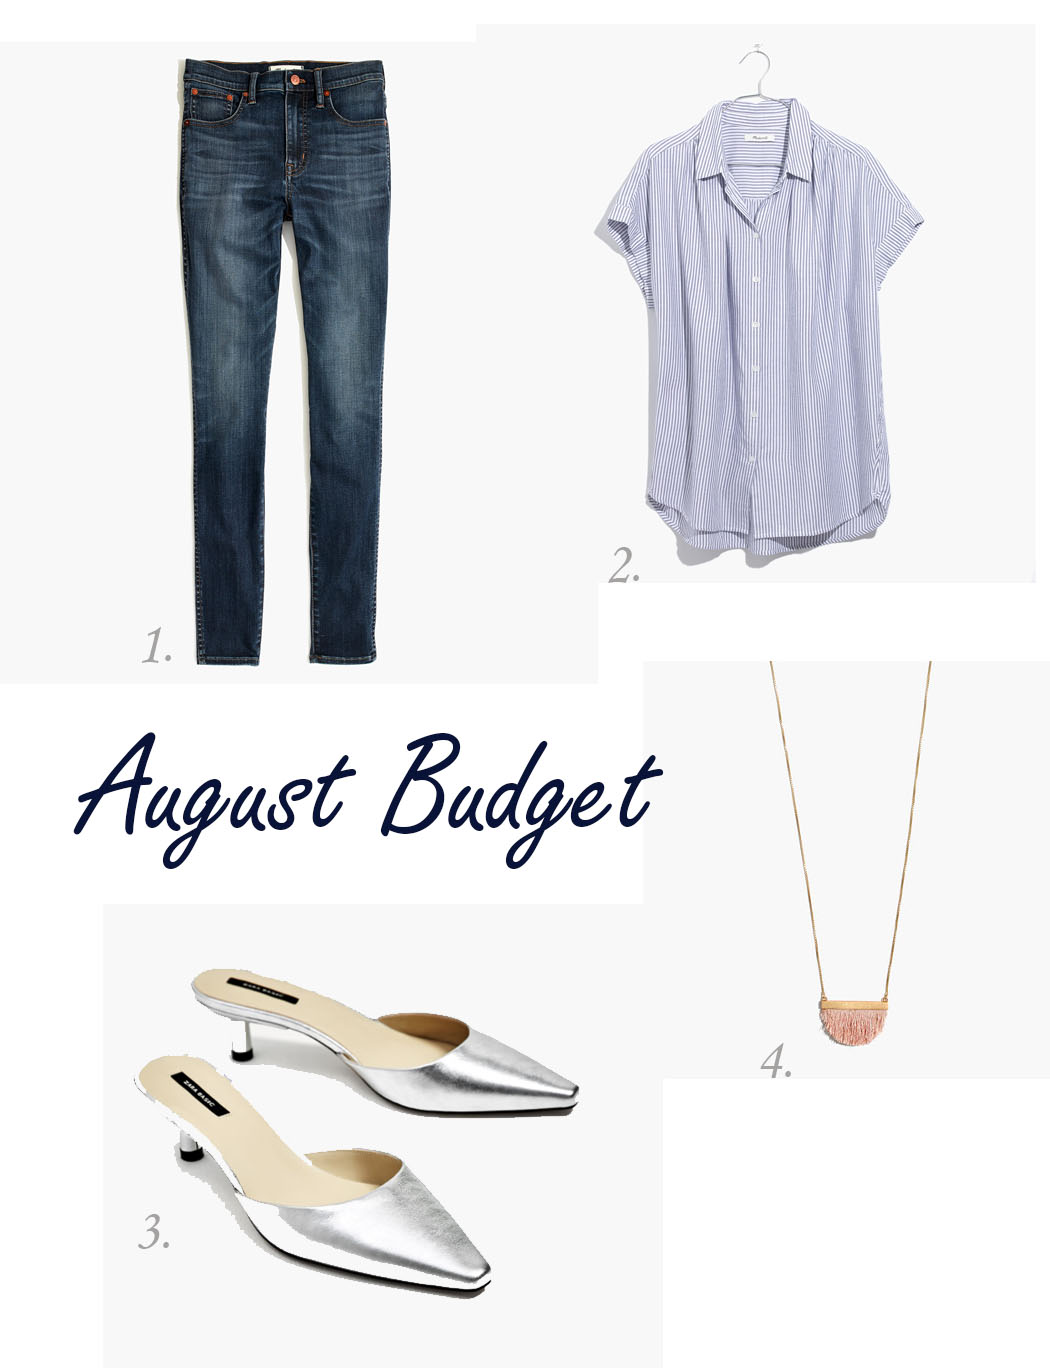 Style with a Budget-August